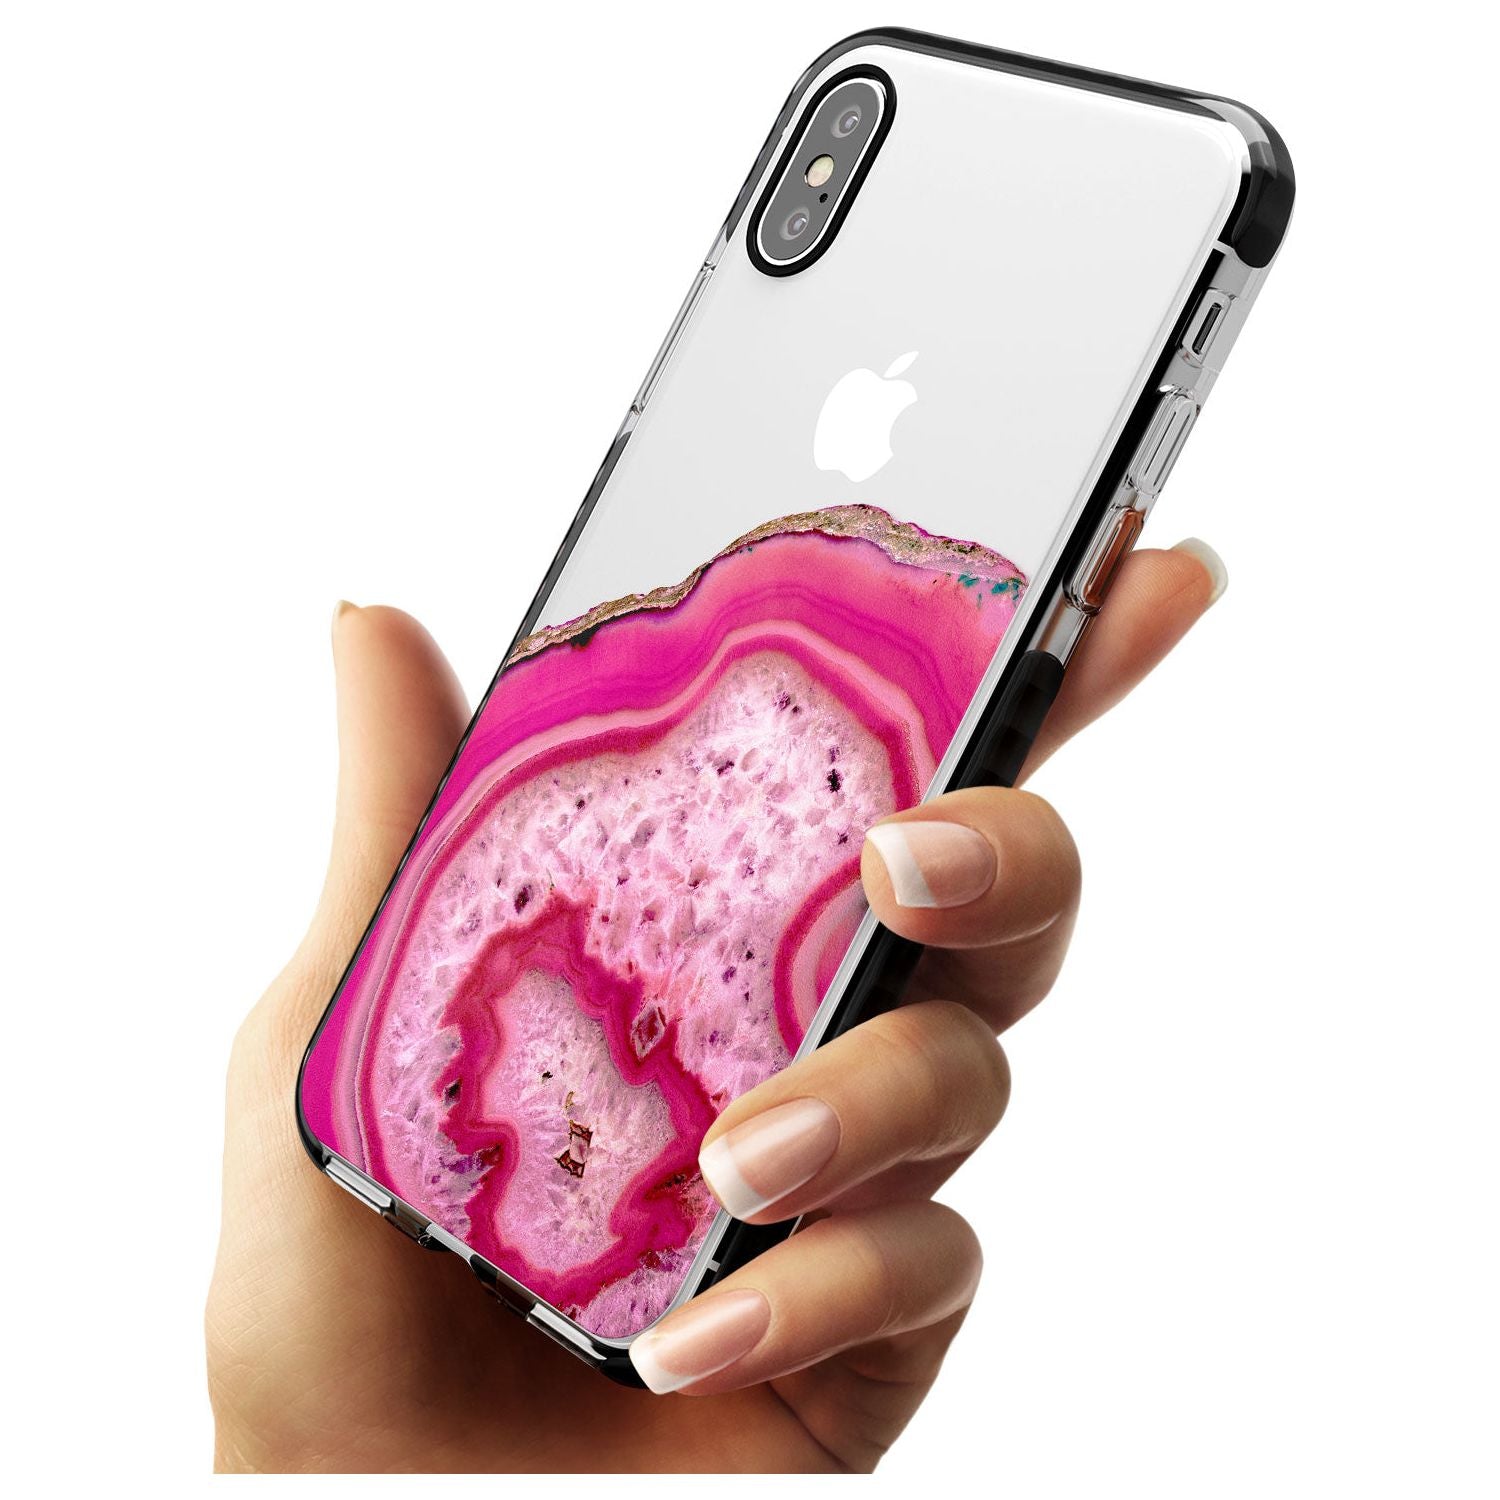 Bright Pink Gemstone Crystal Clear Design Black Impact Phone Case for iPhone X XS Max XR